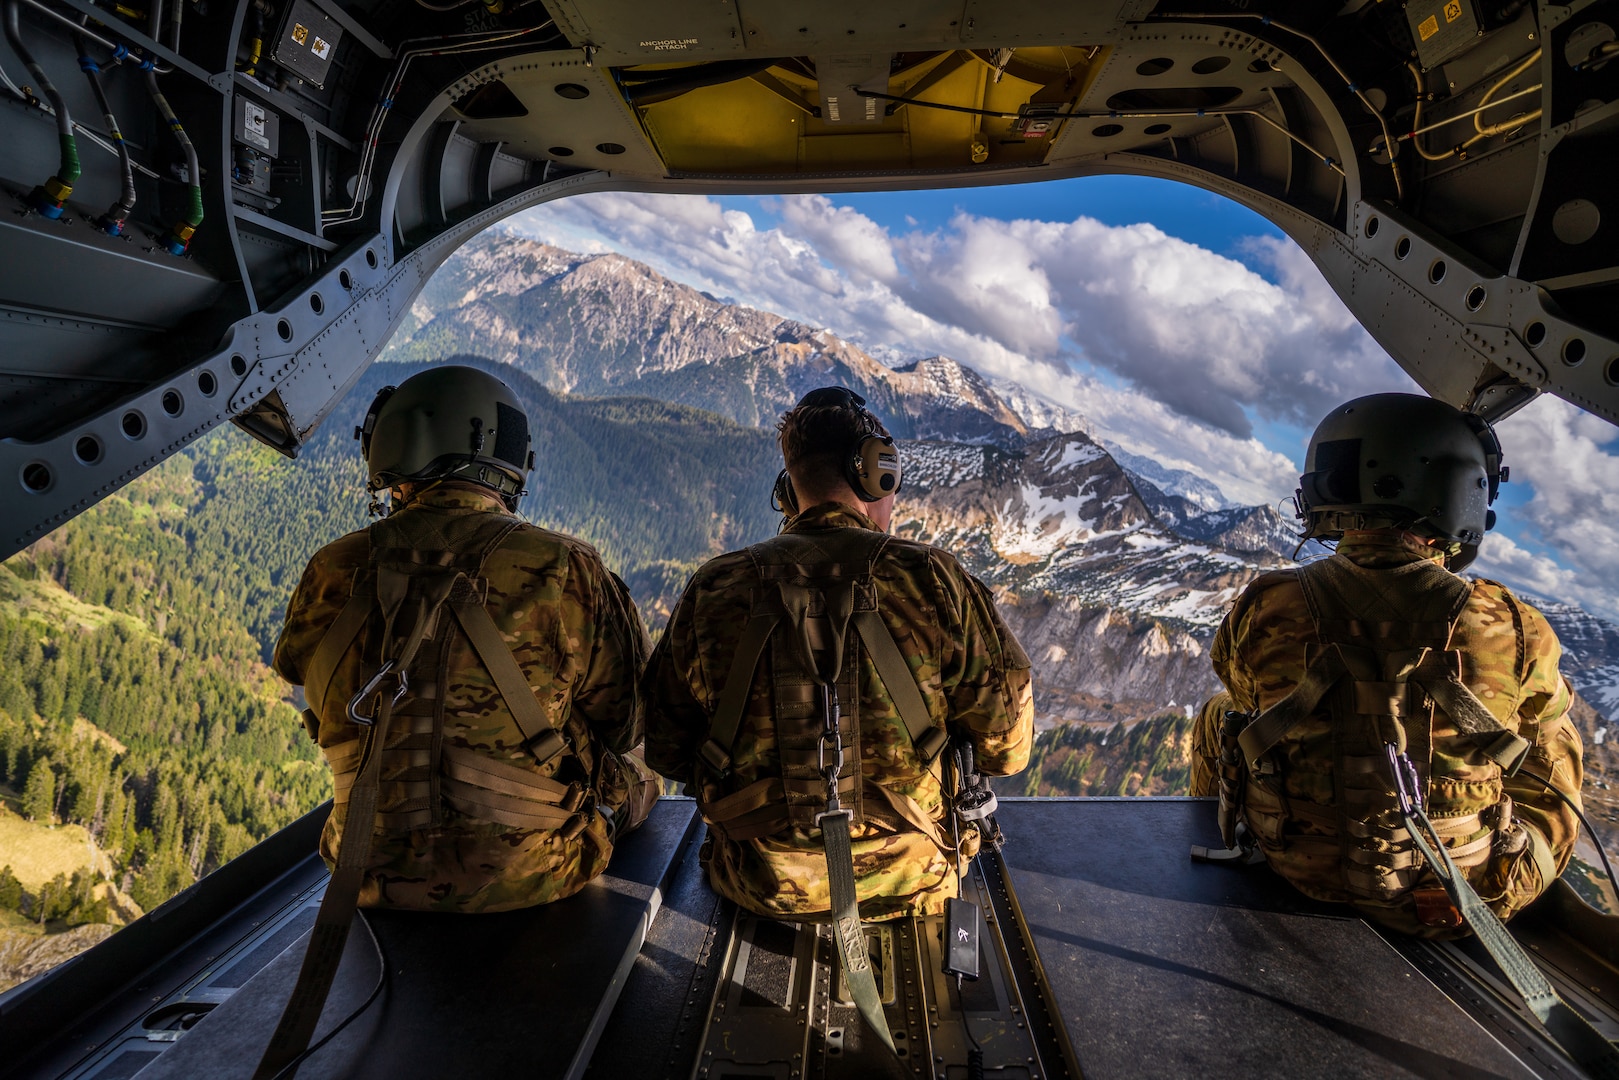 (Left to Right) Capt. Derek Houser, Capt. Nicholas Brischler, and Sgt. Kevin Pagan enjoy the view from the ramp of a CH-47 Chinook from B Co, 1-214th General Support Aviation Battalion during a high-altitude training flight in the Bavarian Alps, Germany on May 4, 2020. (U.S. Army photo by Maj. Robert Fellingham)